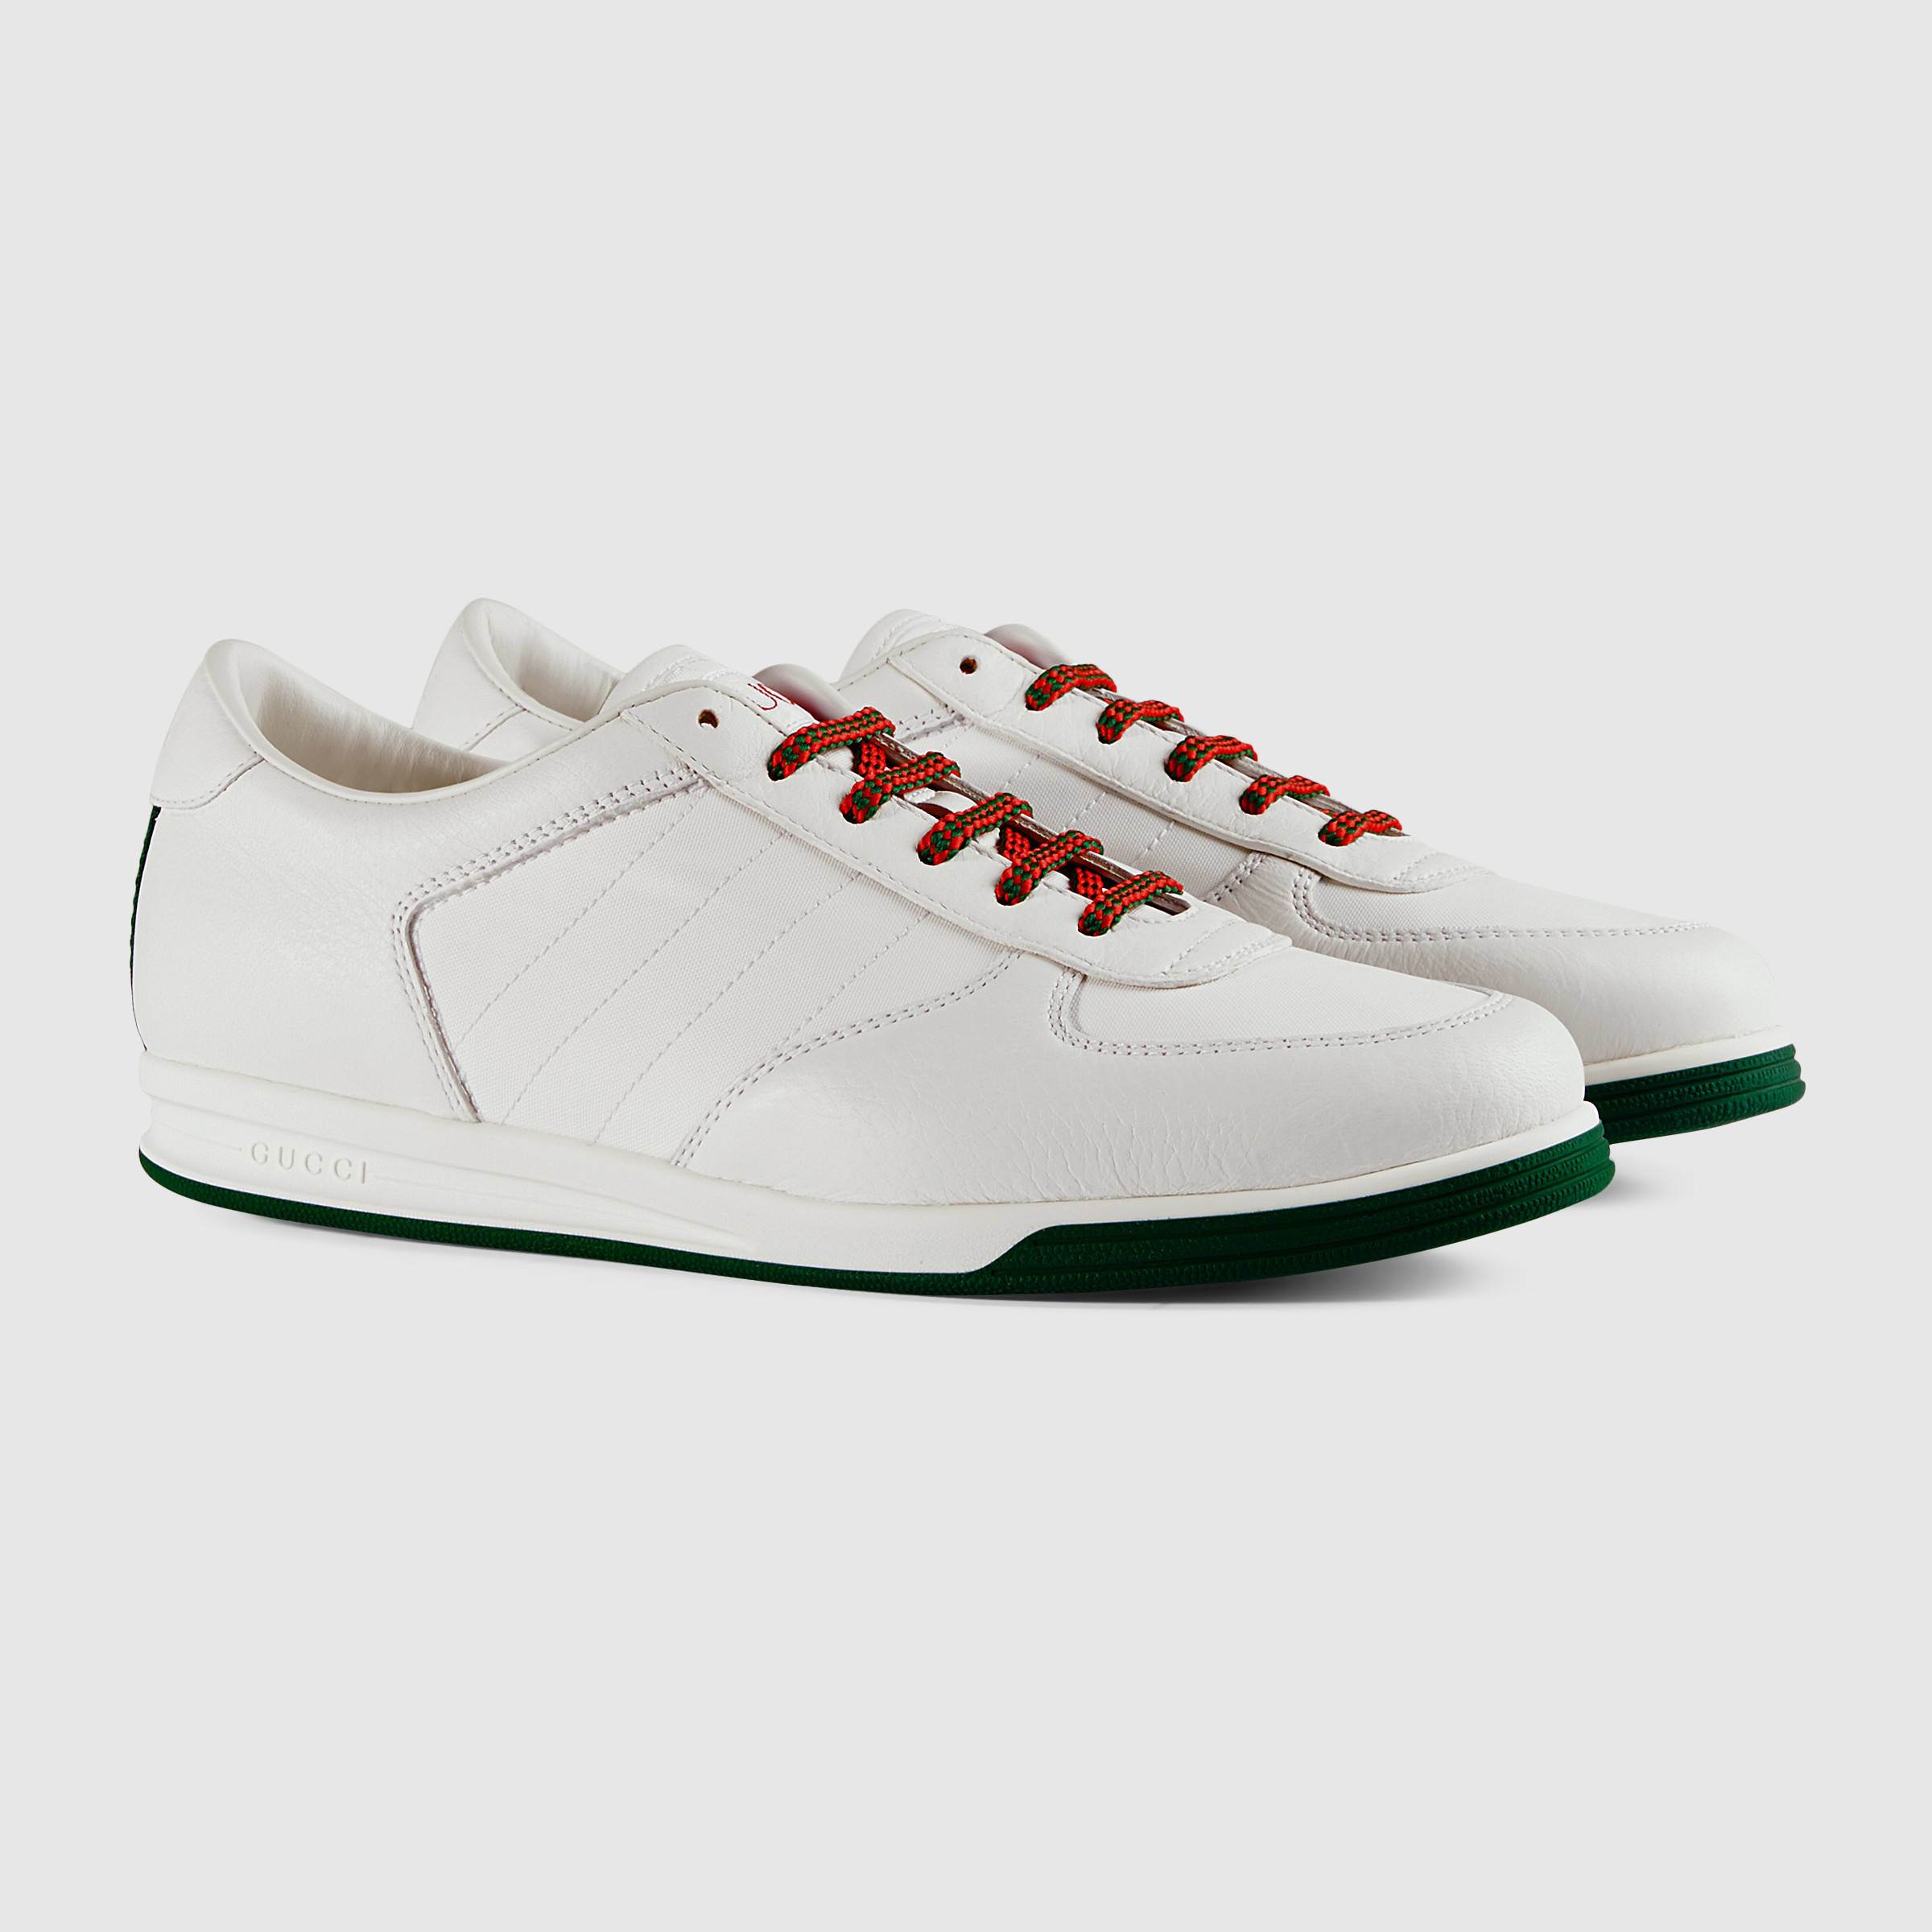 Lyst - Gucci 1984 Low Top Sneaker In Leather in White